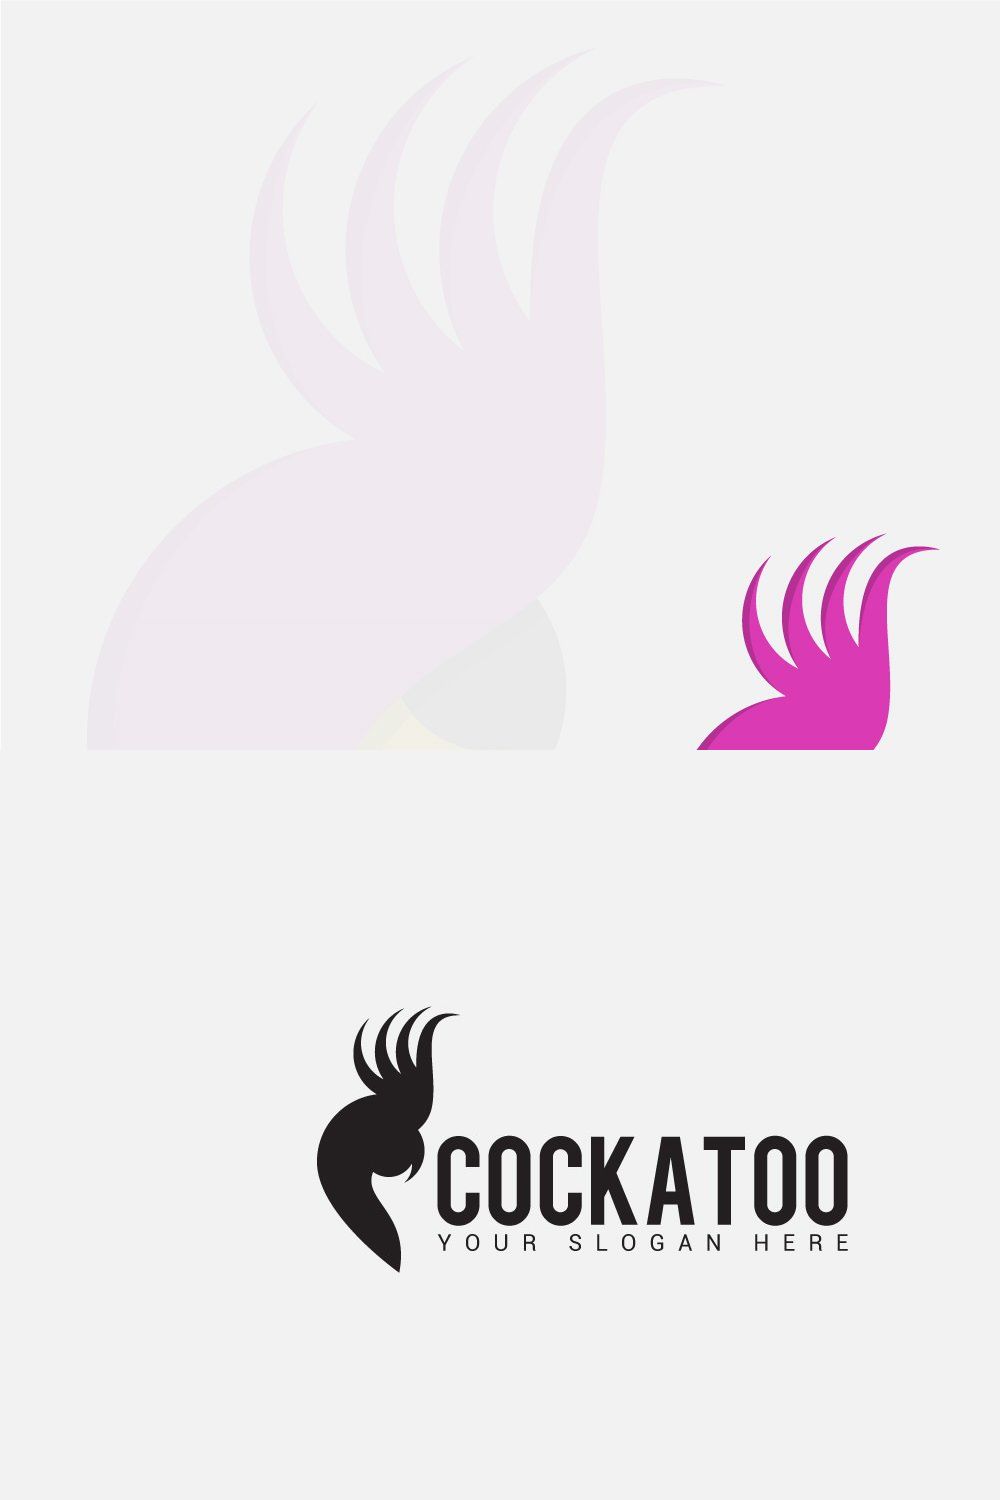 Cockatoo pinterest preview image.